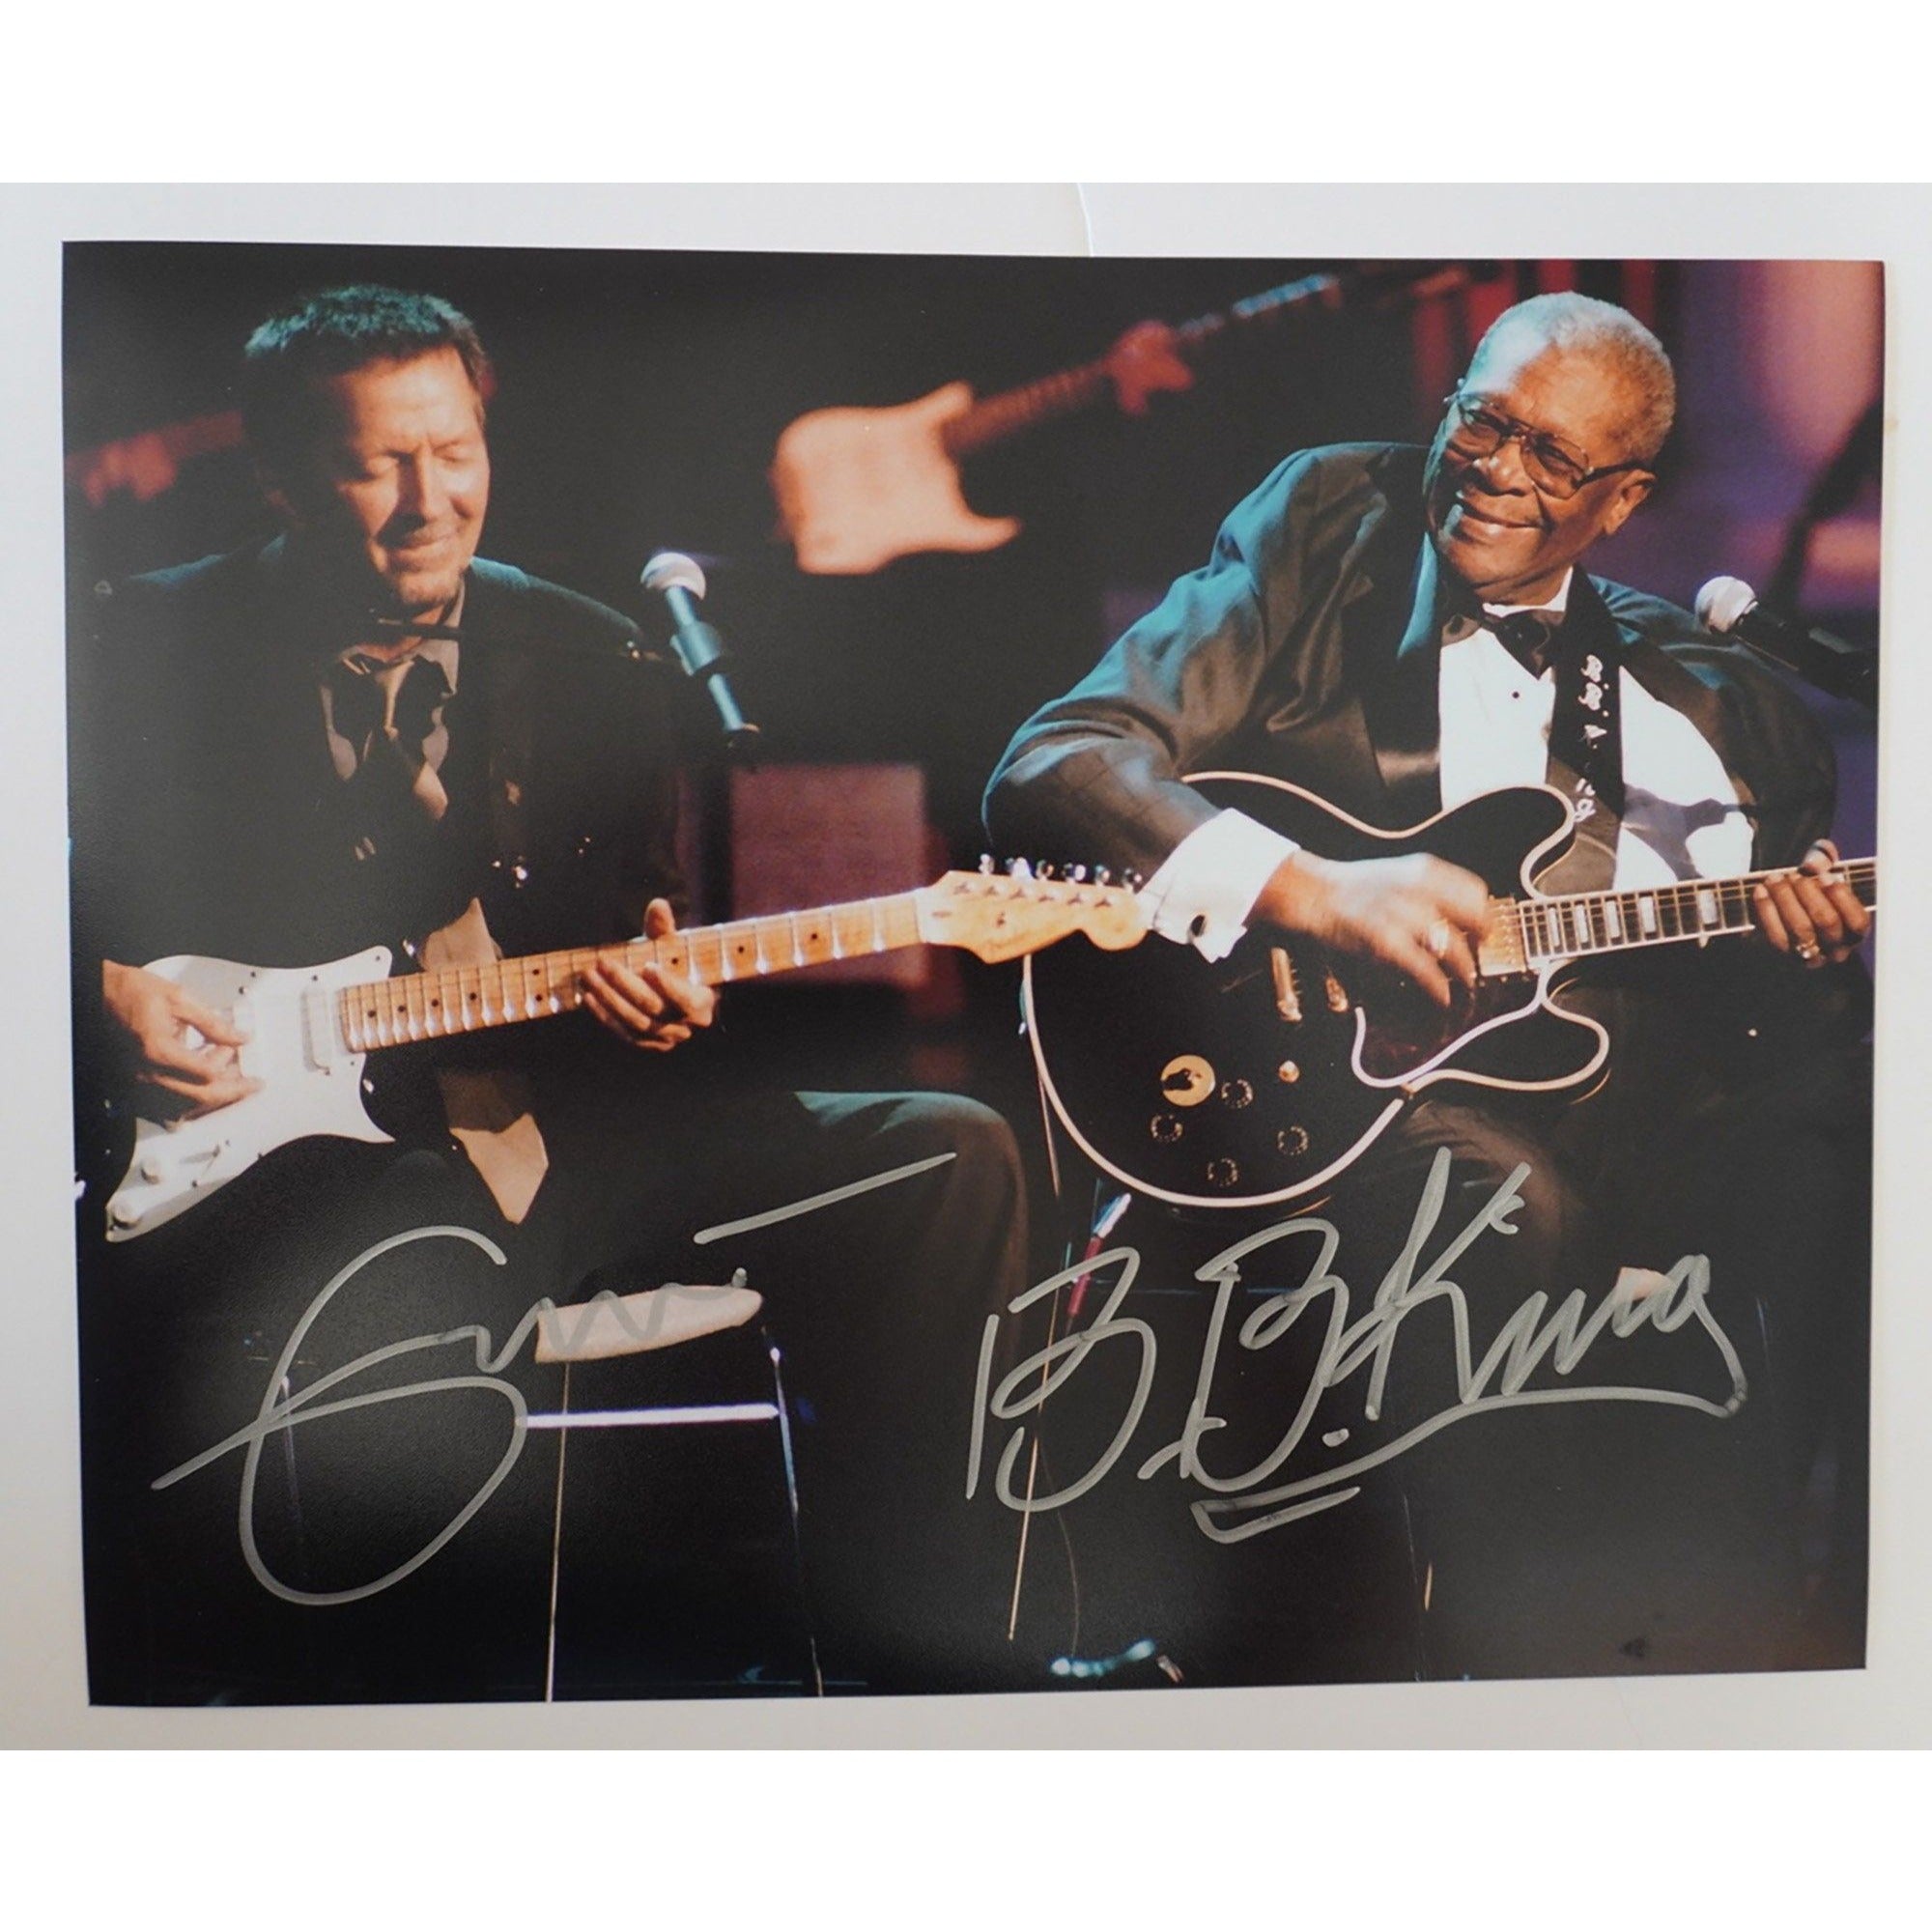 B.B. King and Eric Clapton 8 by 10 signed photo with proof